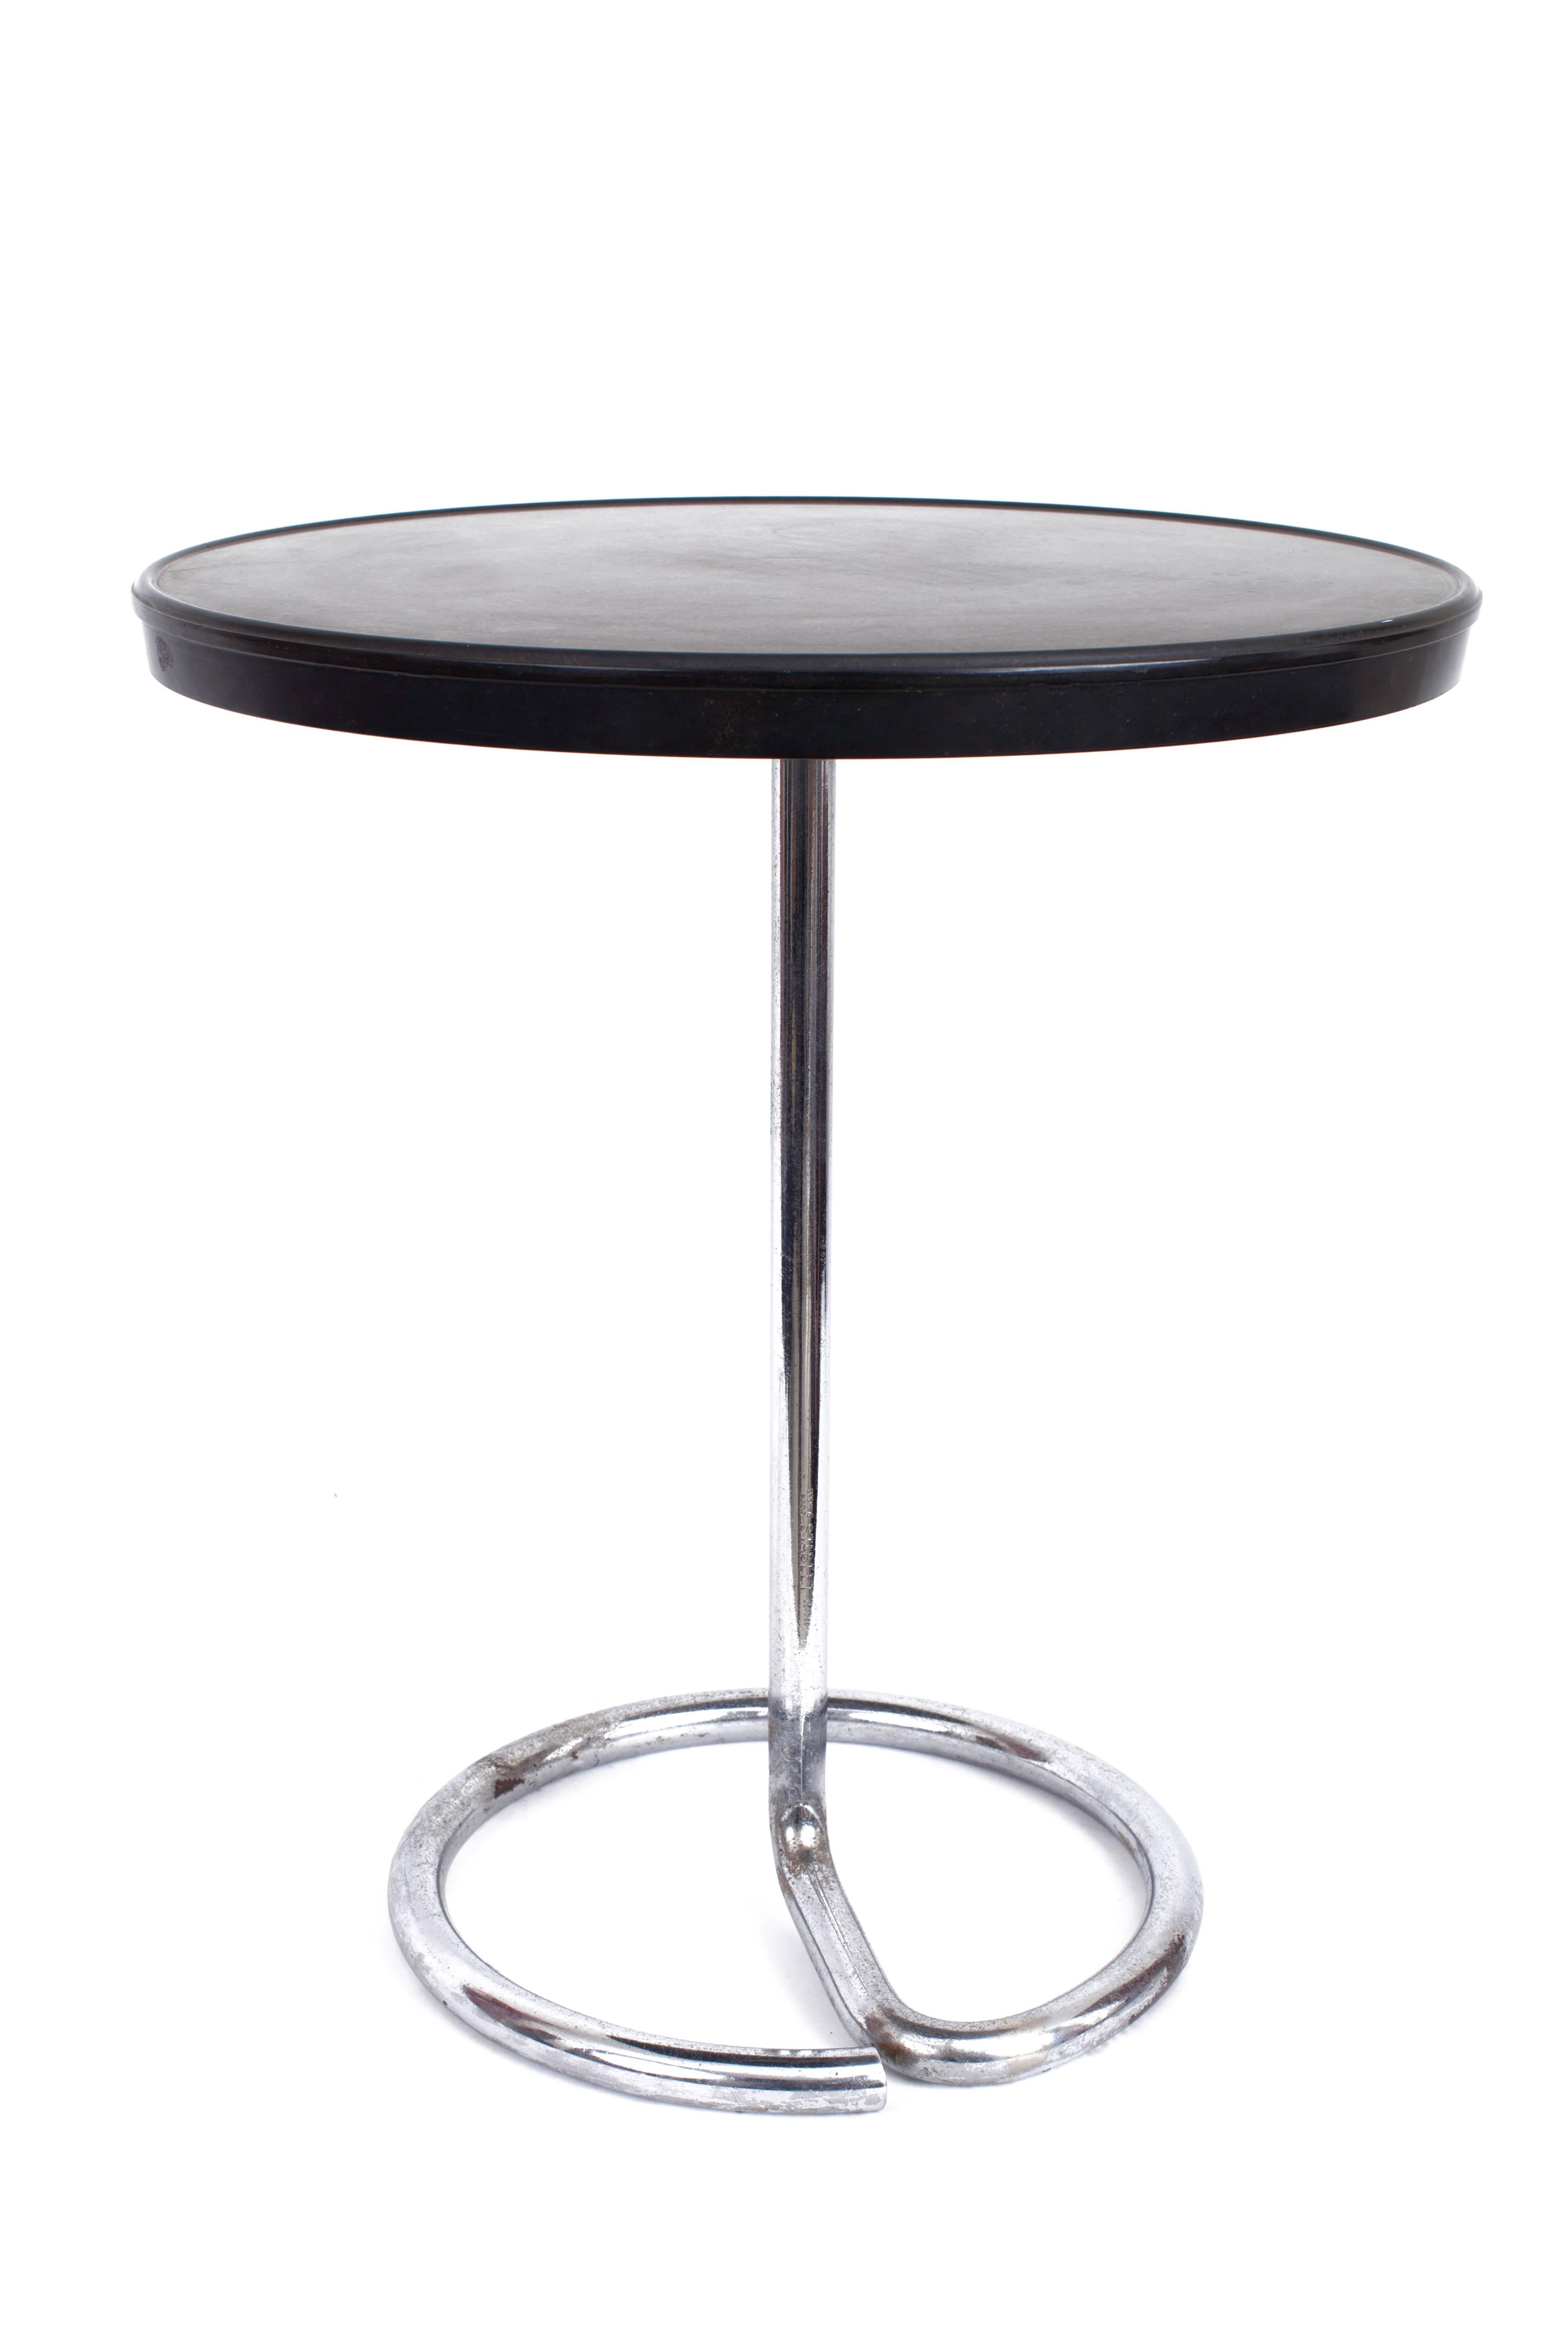 René Herbst (1891–1982), attributed.

Minimalist chromed tubular steel end table with Bakelite top for Stablet, attributed to René Herbst.

Stamped Stablet on base.